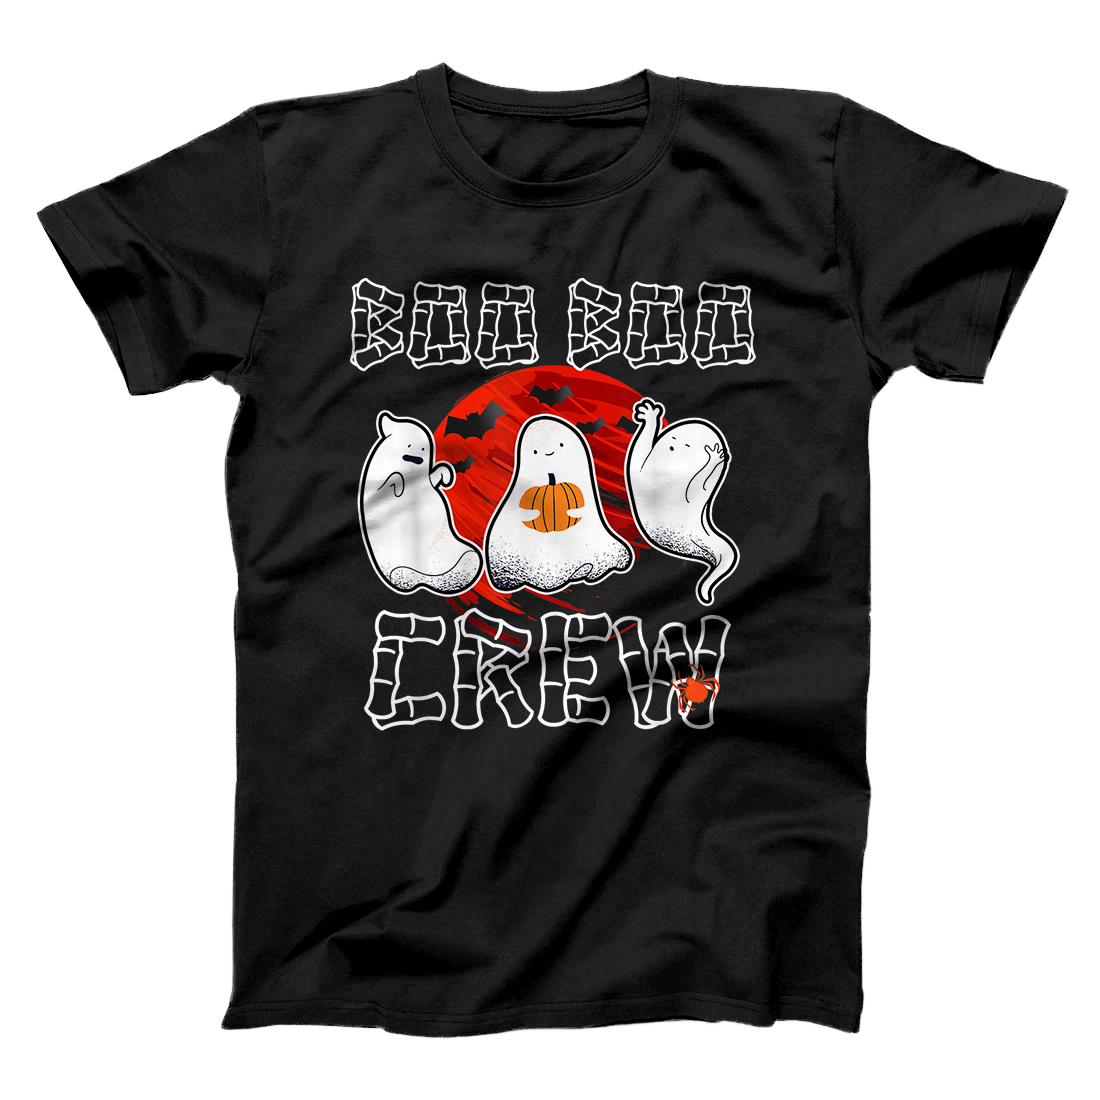 Personalized Boo Boo Crew Ghost buddy T-Shirt Halloween Costume Gift T-Shirt